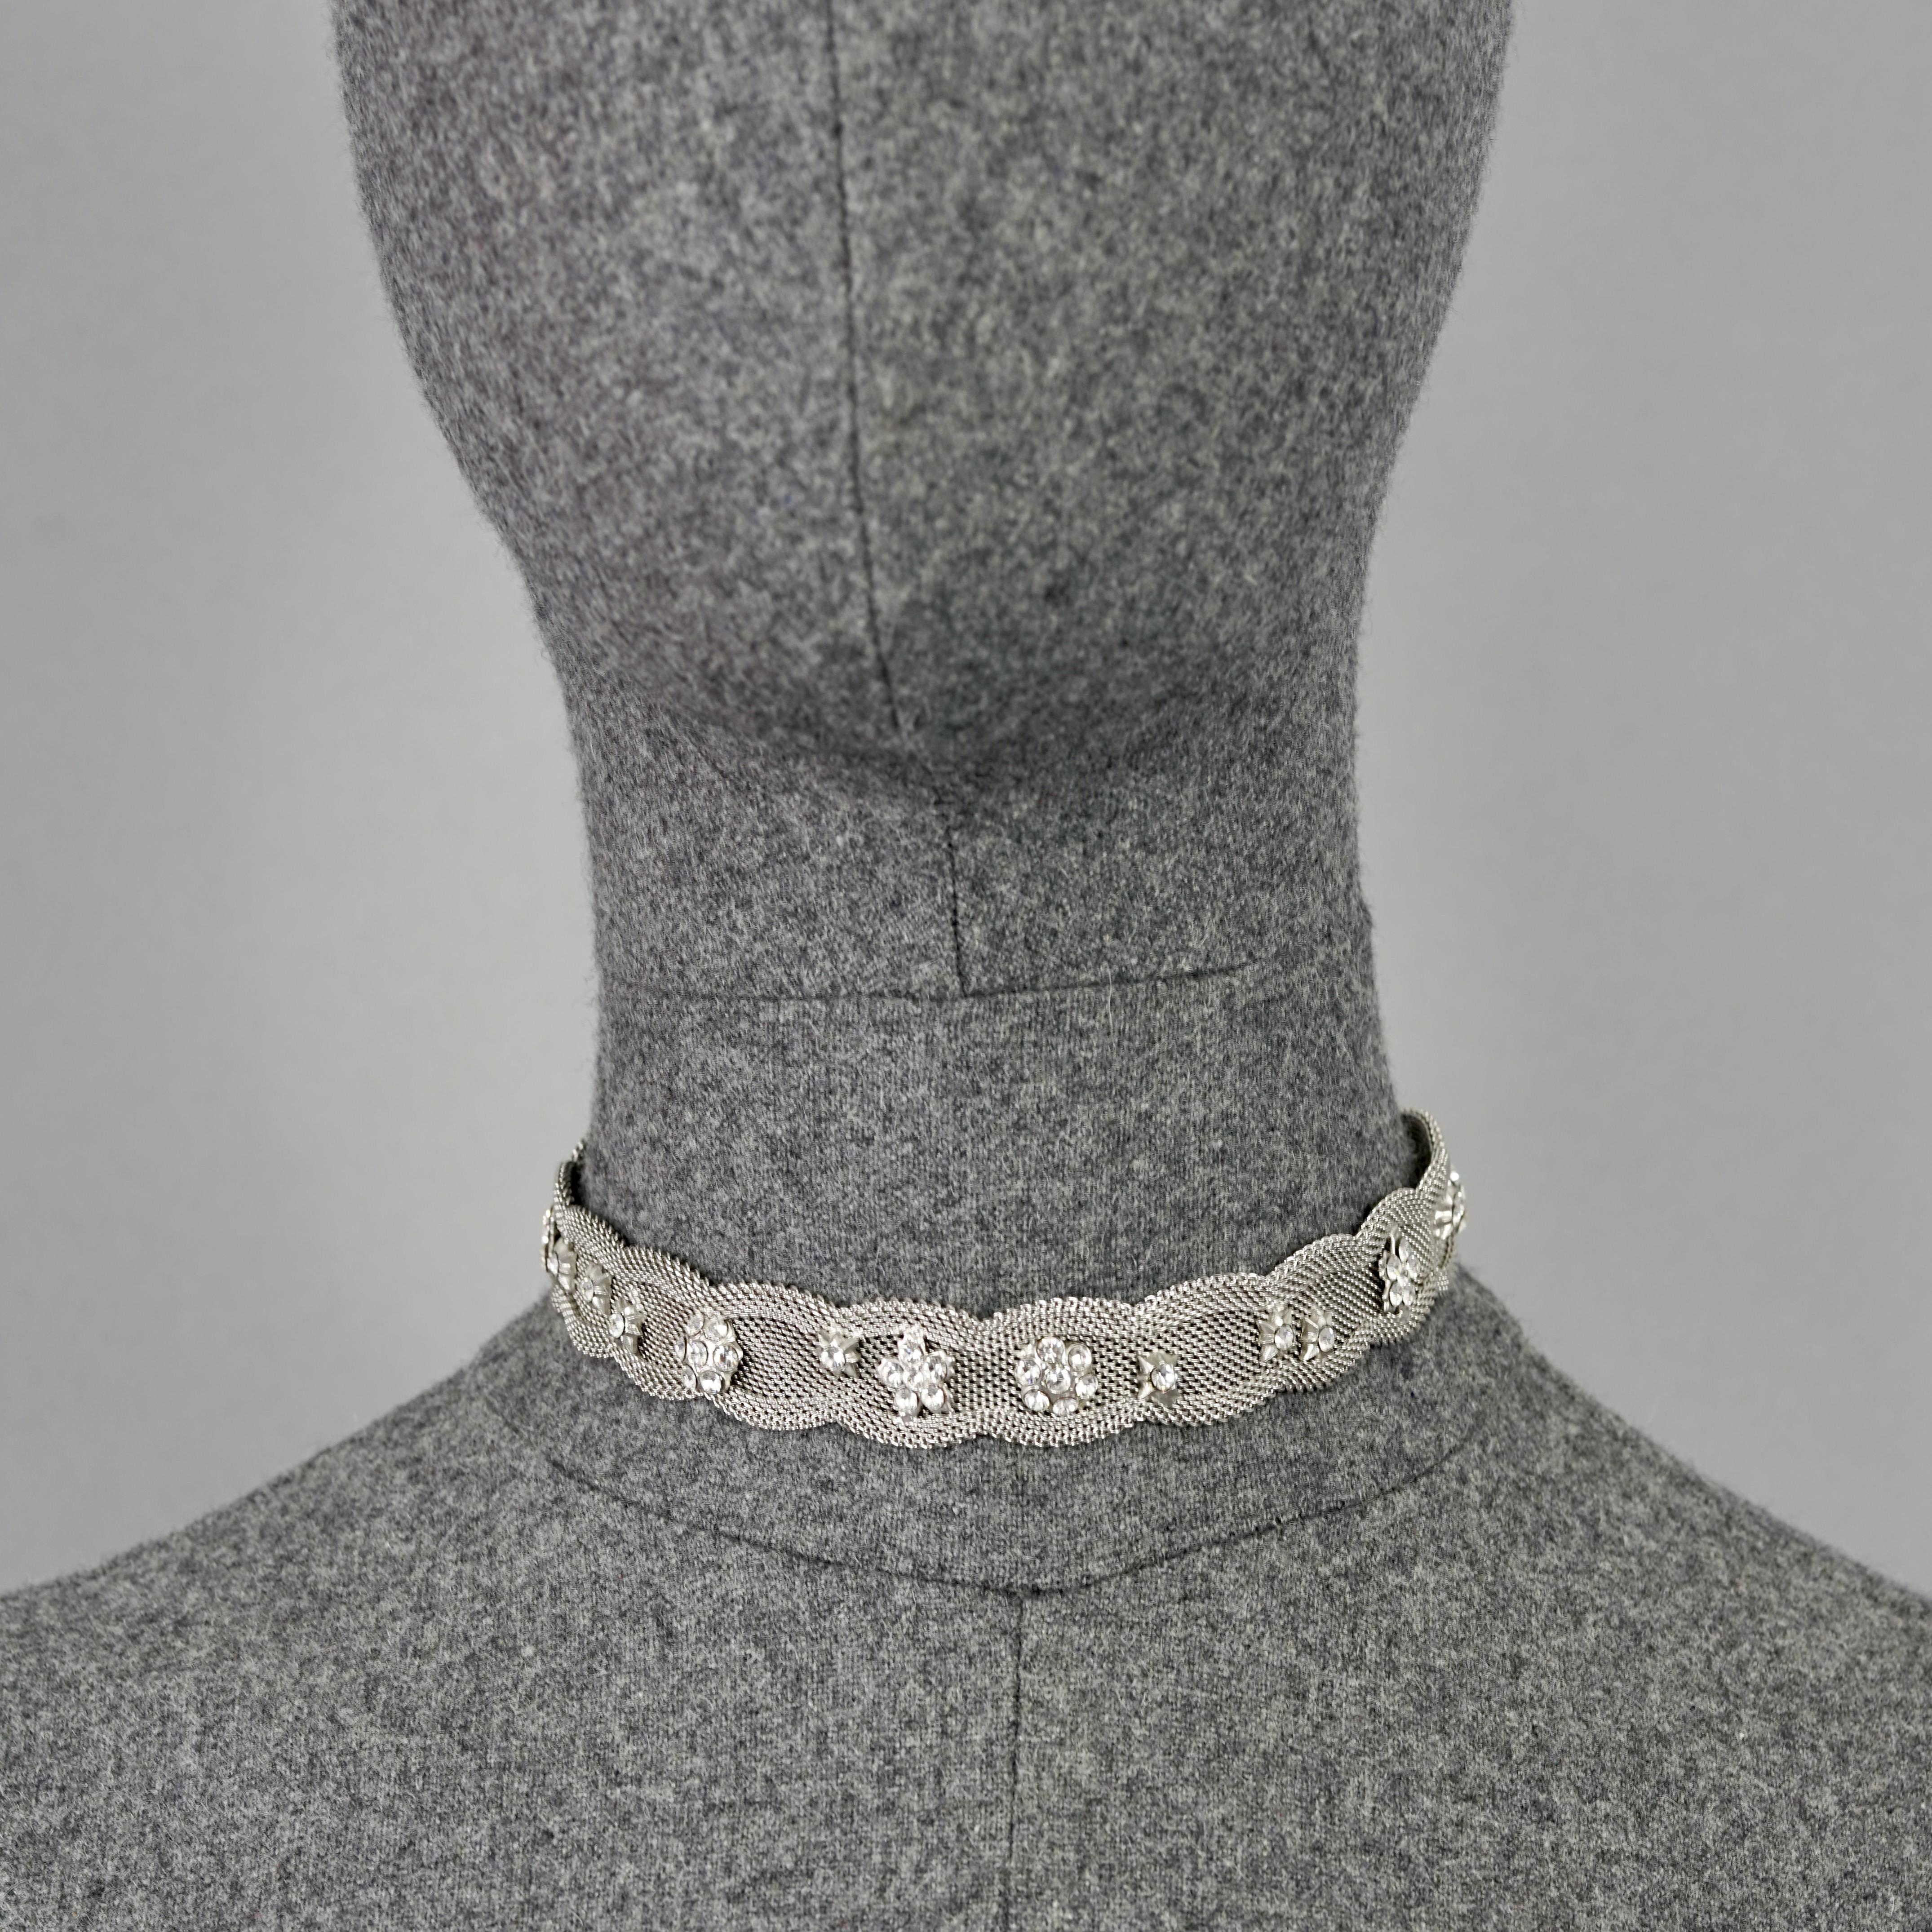 Vintage CHRISTIAN LACROIX Victorian Mesh Flower Rhinestone Silver Choker Necklace

Measurements:
Height: 0.75 inches (1.9 cm)
Wearable Length: 13.19 inches (33.5 cm)

Features:
- 100% Authentic CHRISTIAN LACROIX.
- Delicate mesh choker embellished